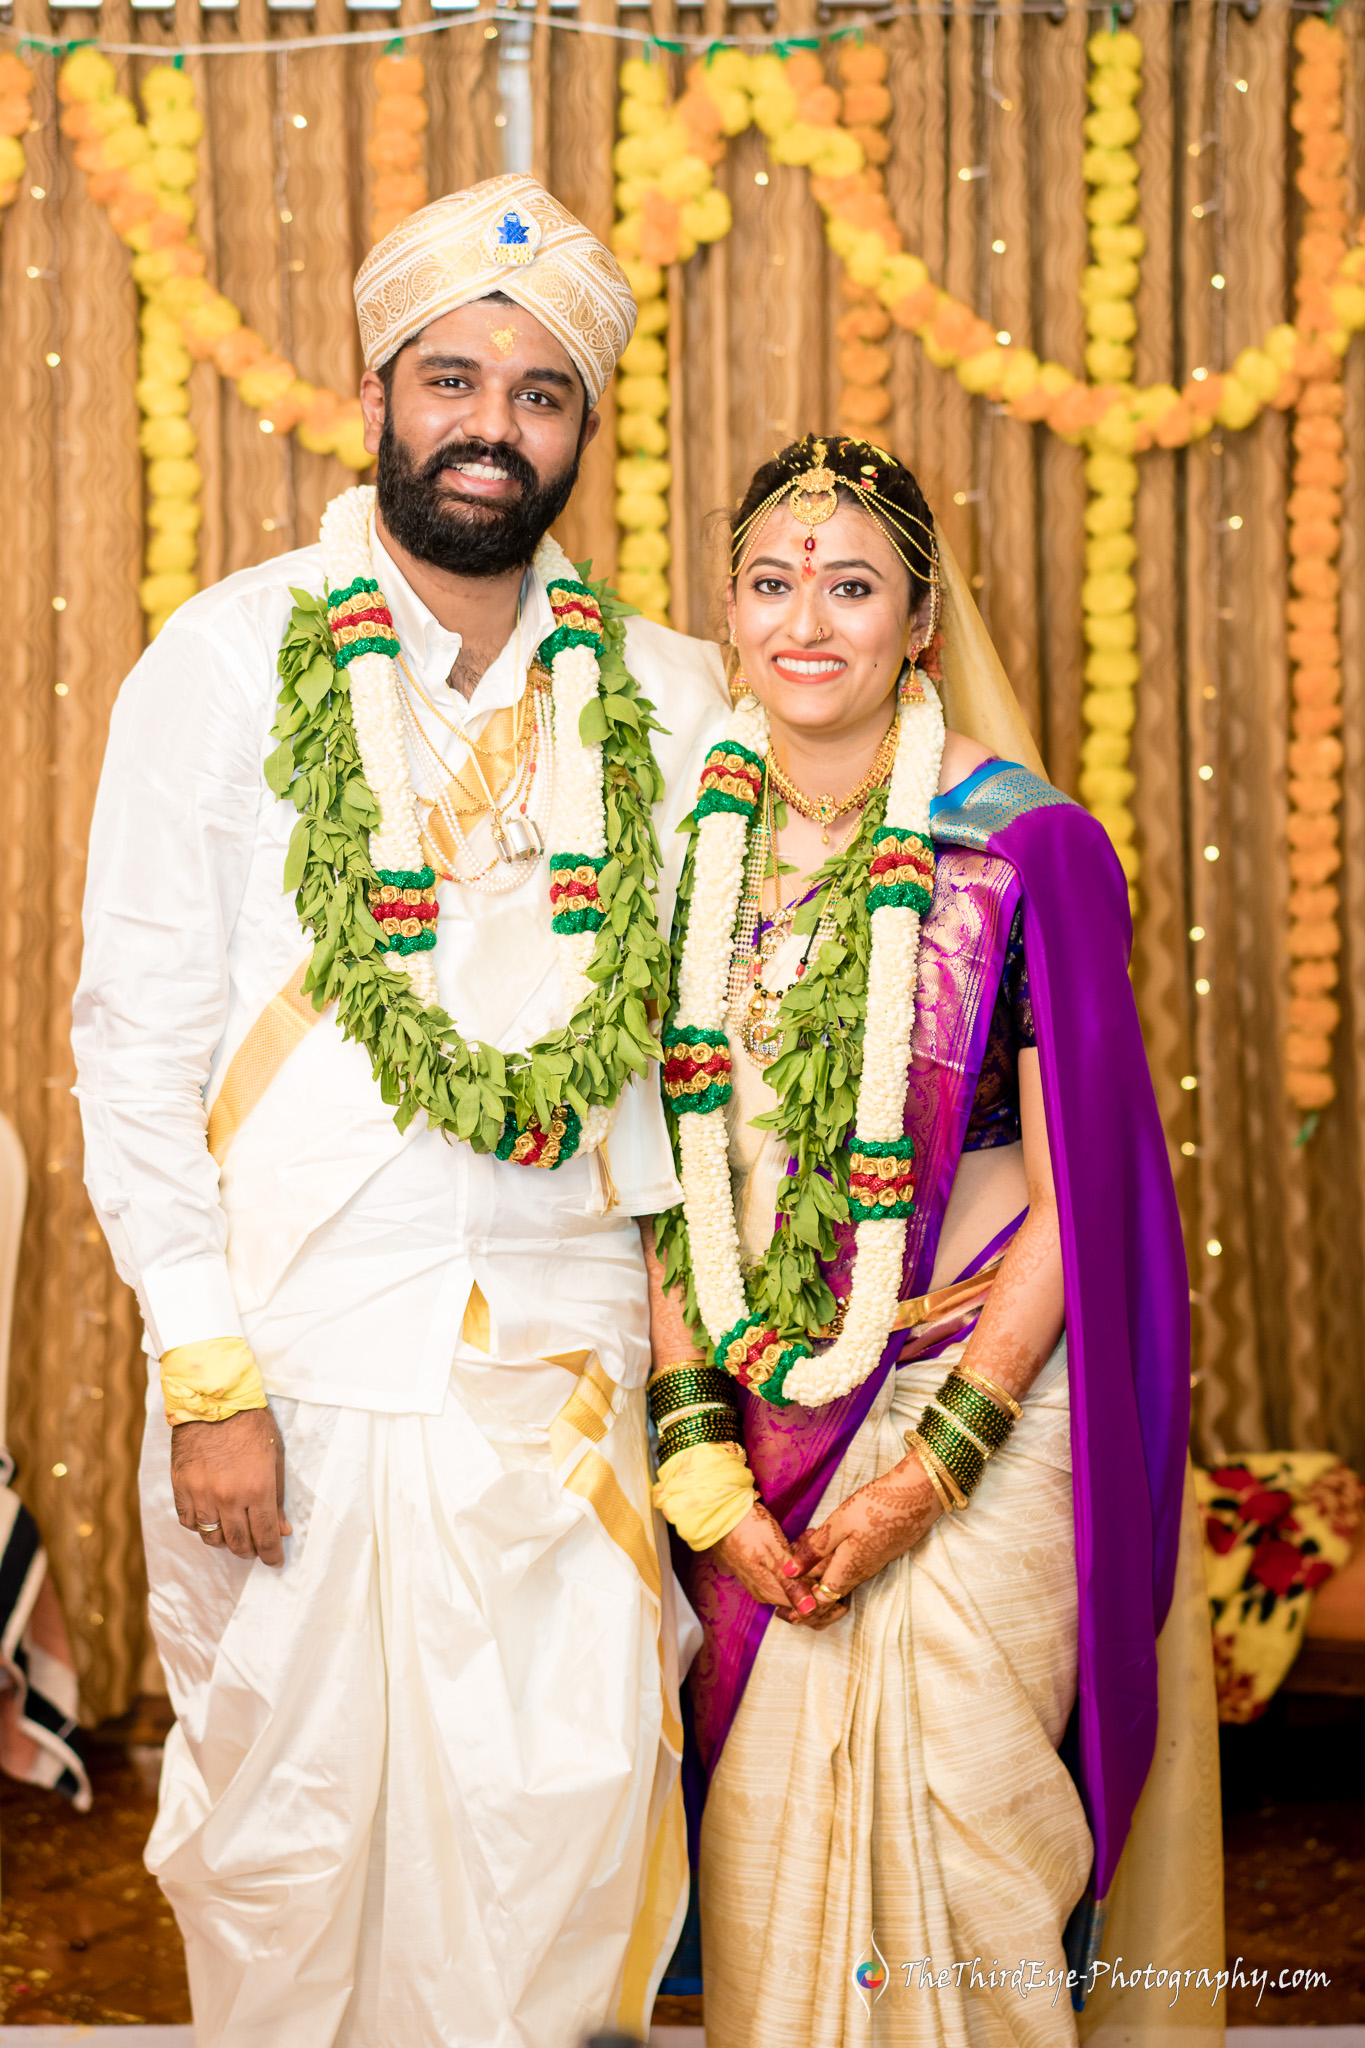 Bride-bridegroom-couple-love-moment-attire-smiles-bw-timeless-happy-Best-indian-wedding-photographer-top-wedding-photographers-Wed-me-good-TTEP_CM_27_A6500624